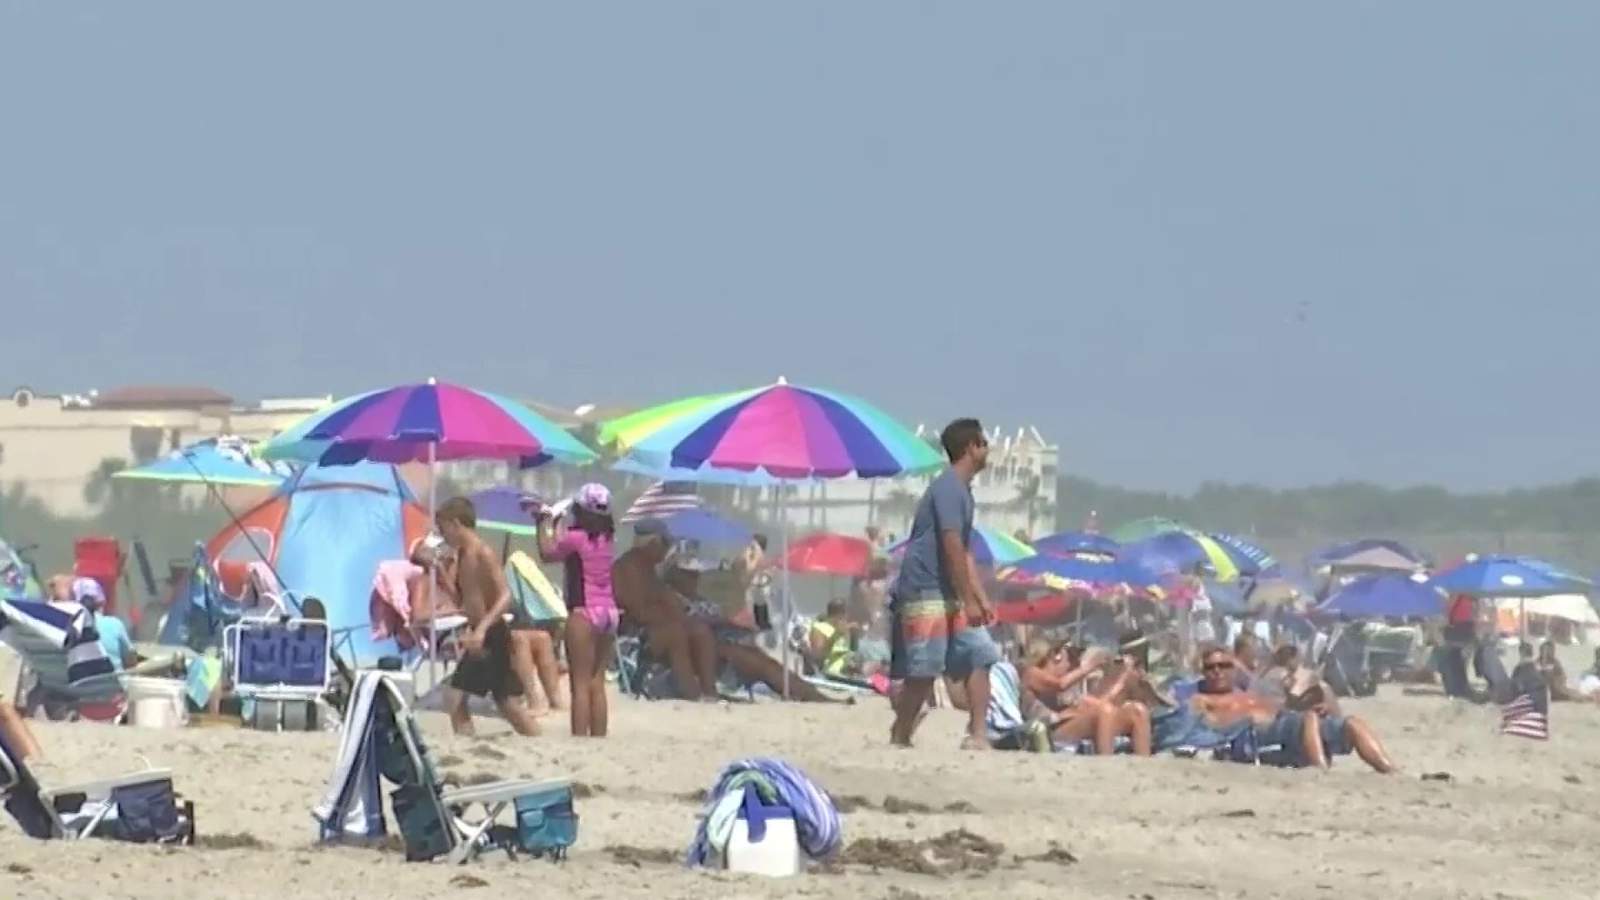 Attendance at Brevard County beaches ‘substantially down’ but drivers taking more risk with parking